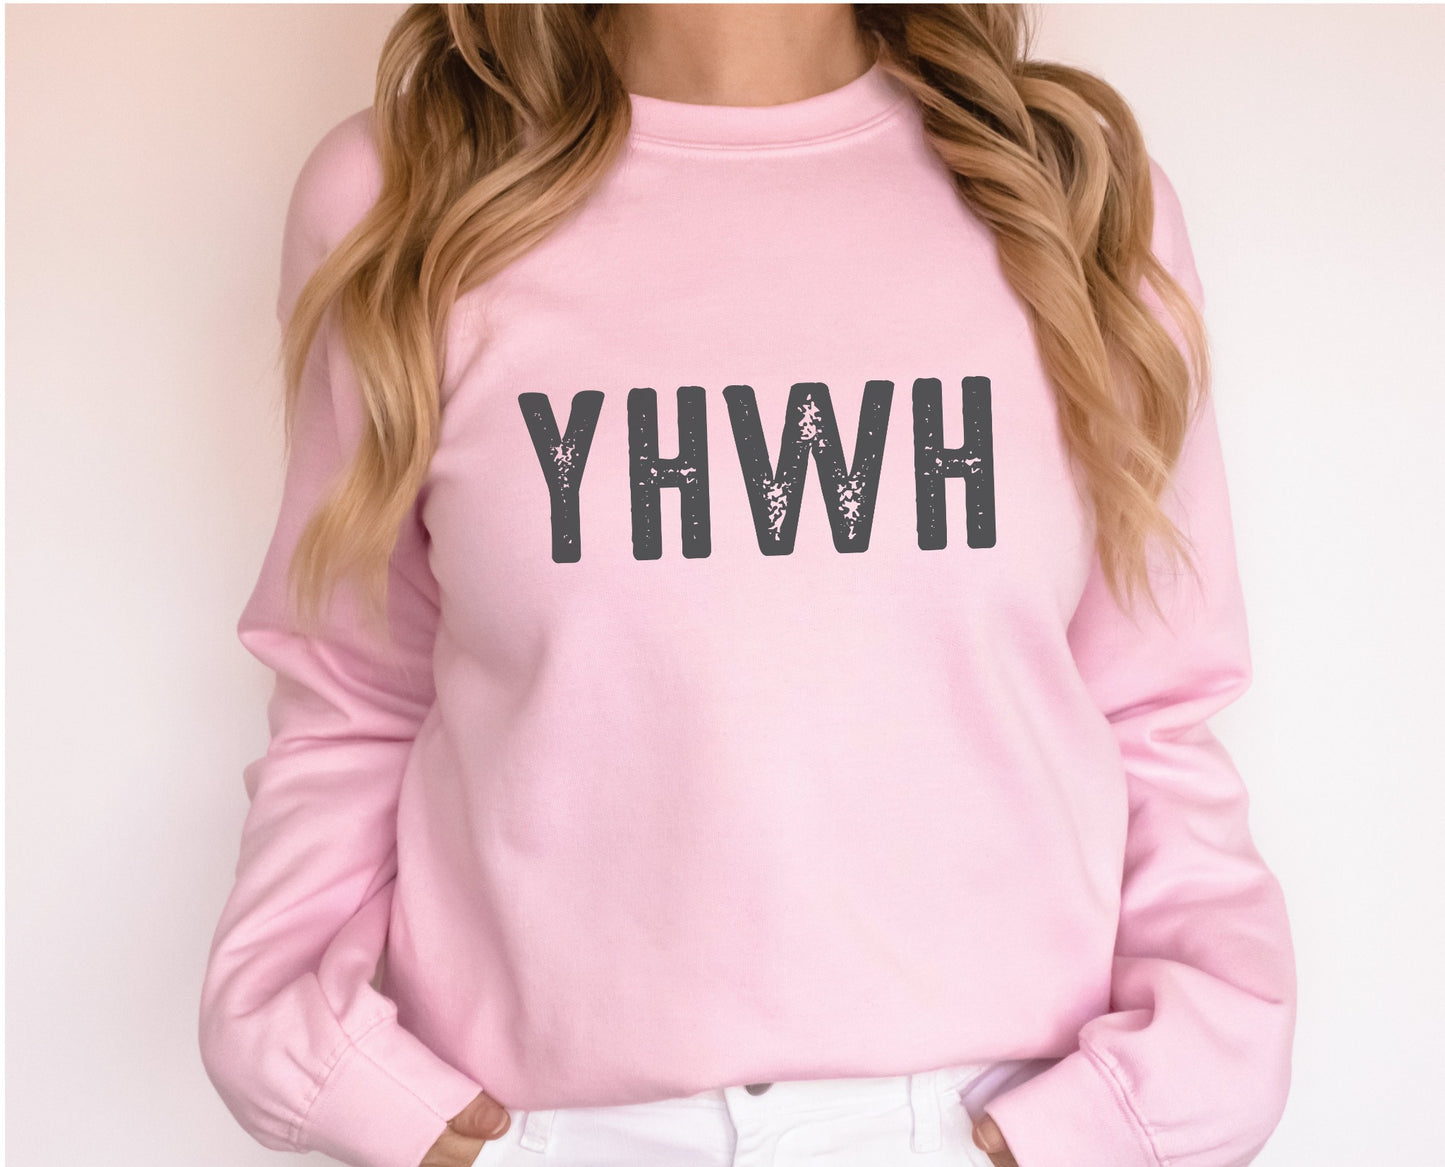 YHWH Hebrew Biblical Name of God Yahweh Christian aesthetic design printed in charcoal on soft light pink unisex crewneck sweatshirt for women